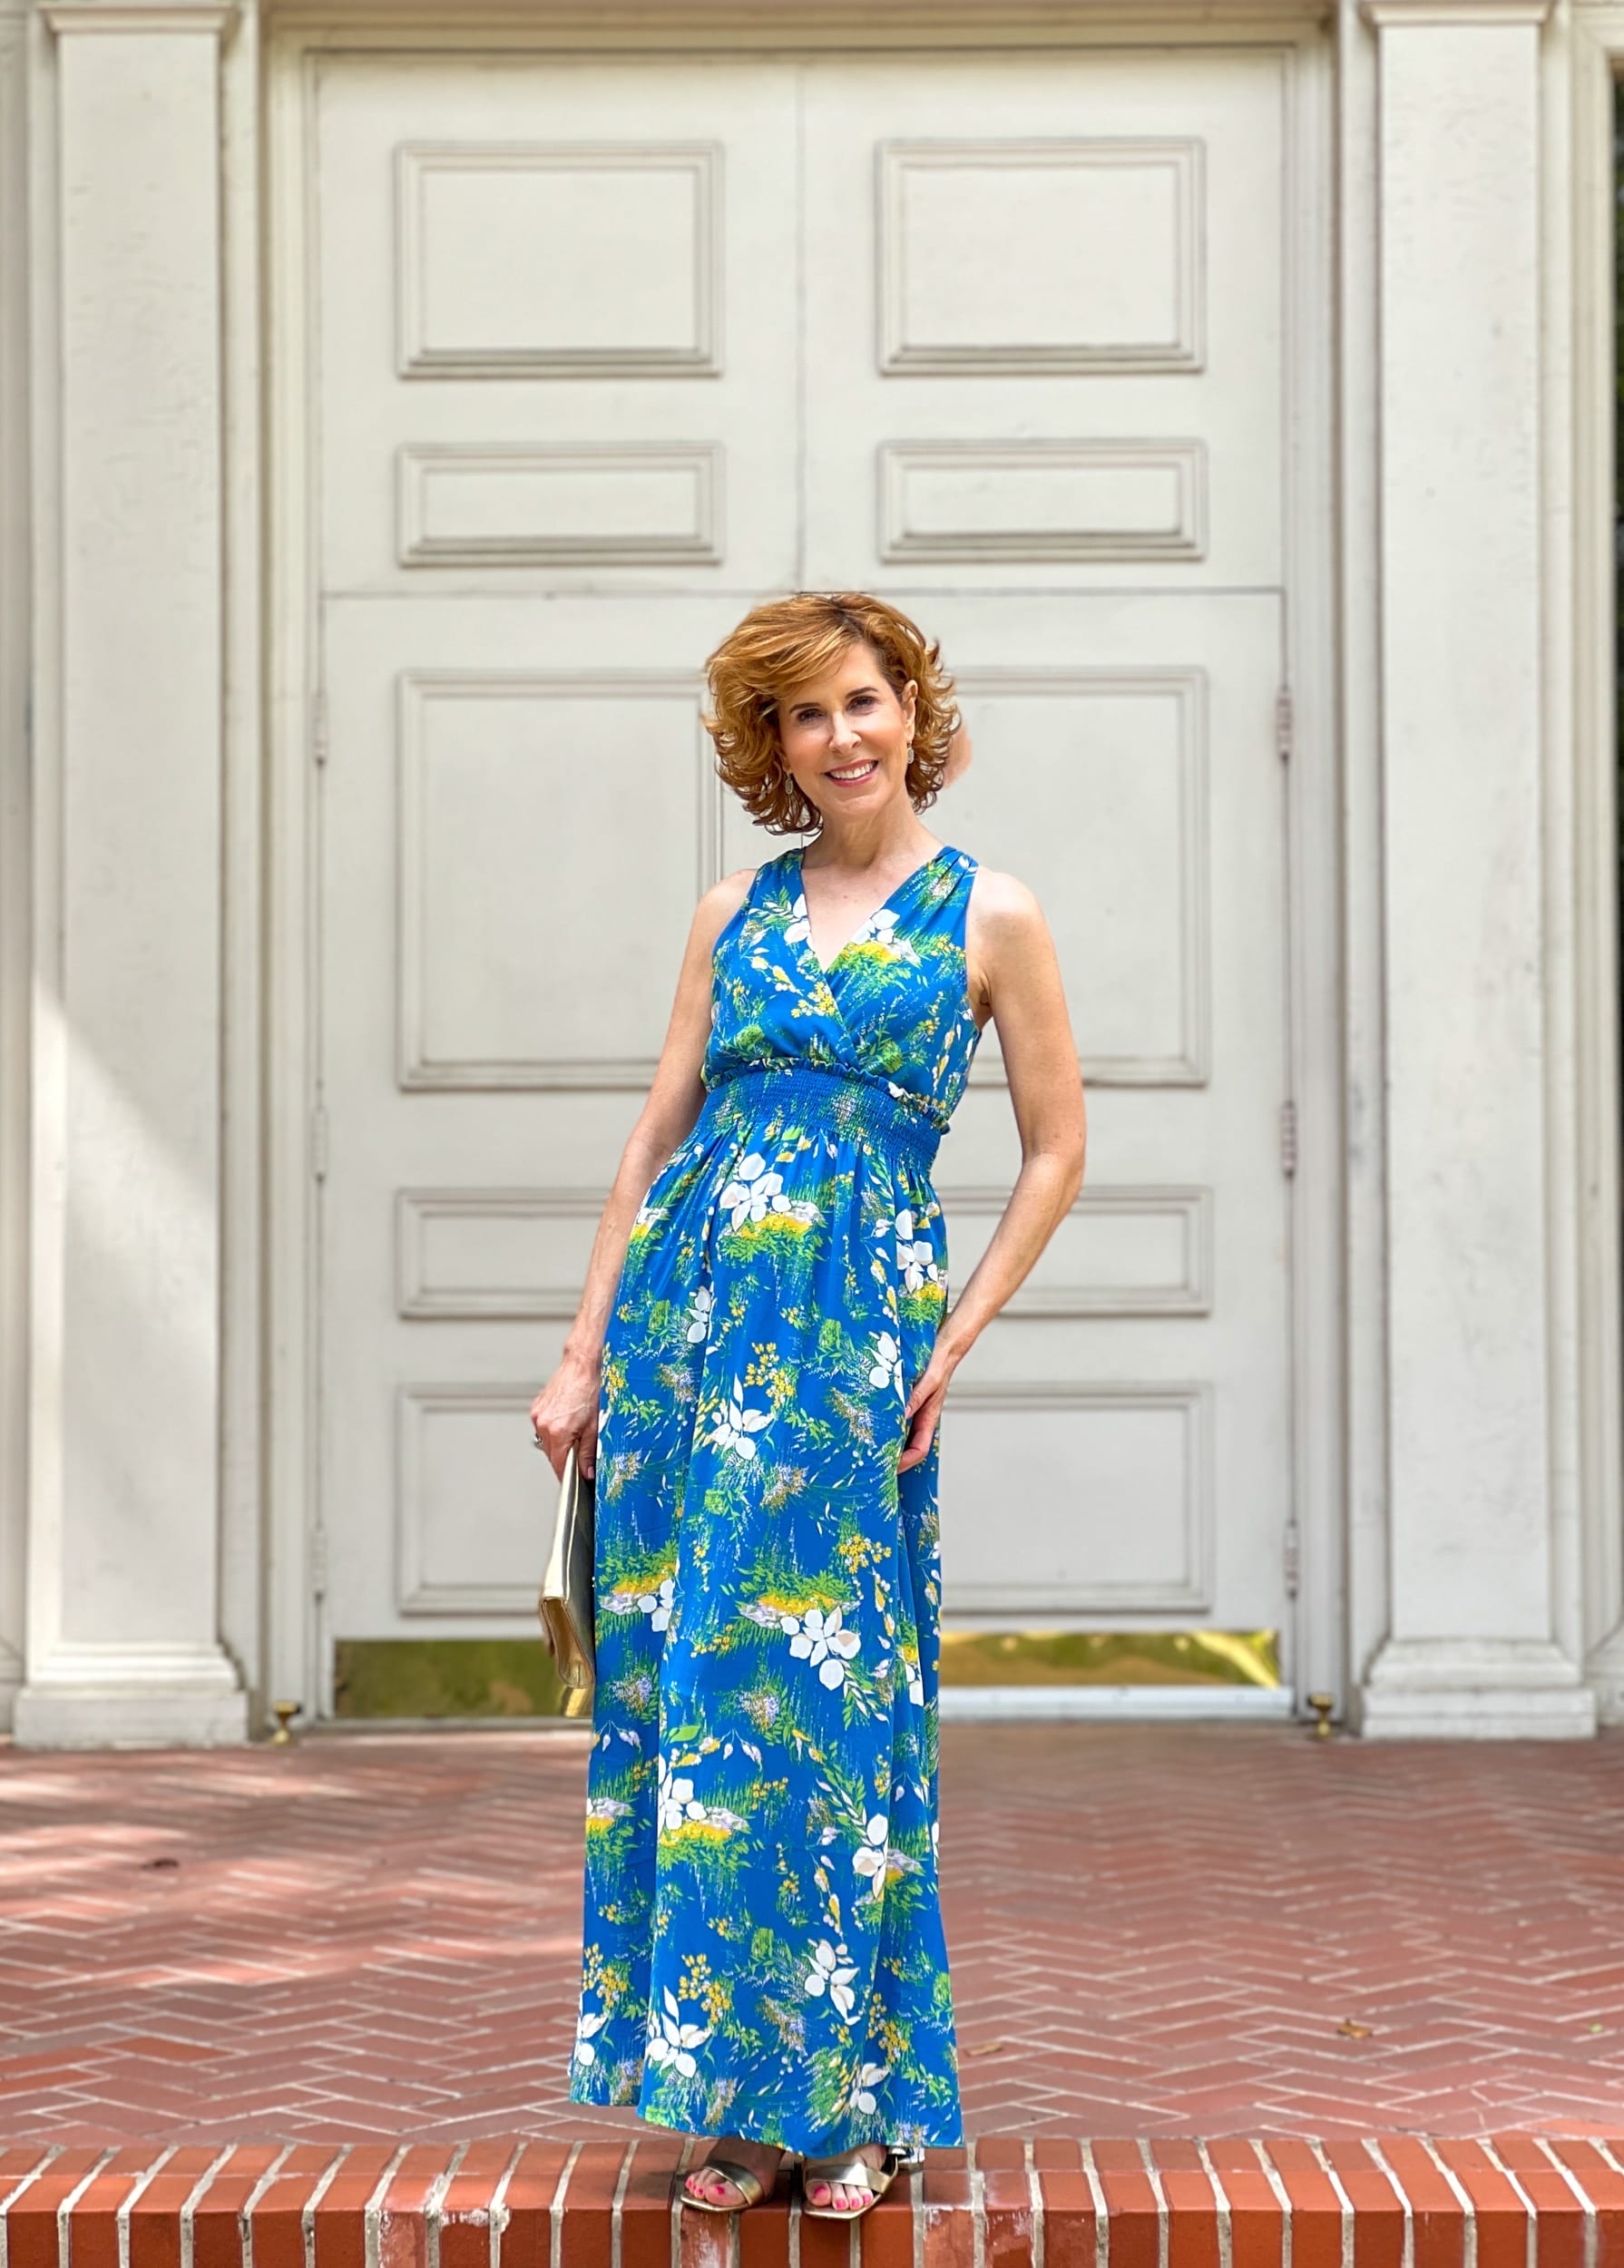 woman over 50 standing in front of church doors wearing Halogen® Wrap Front Halter Dress from Nordstrom Made Brands